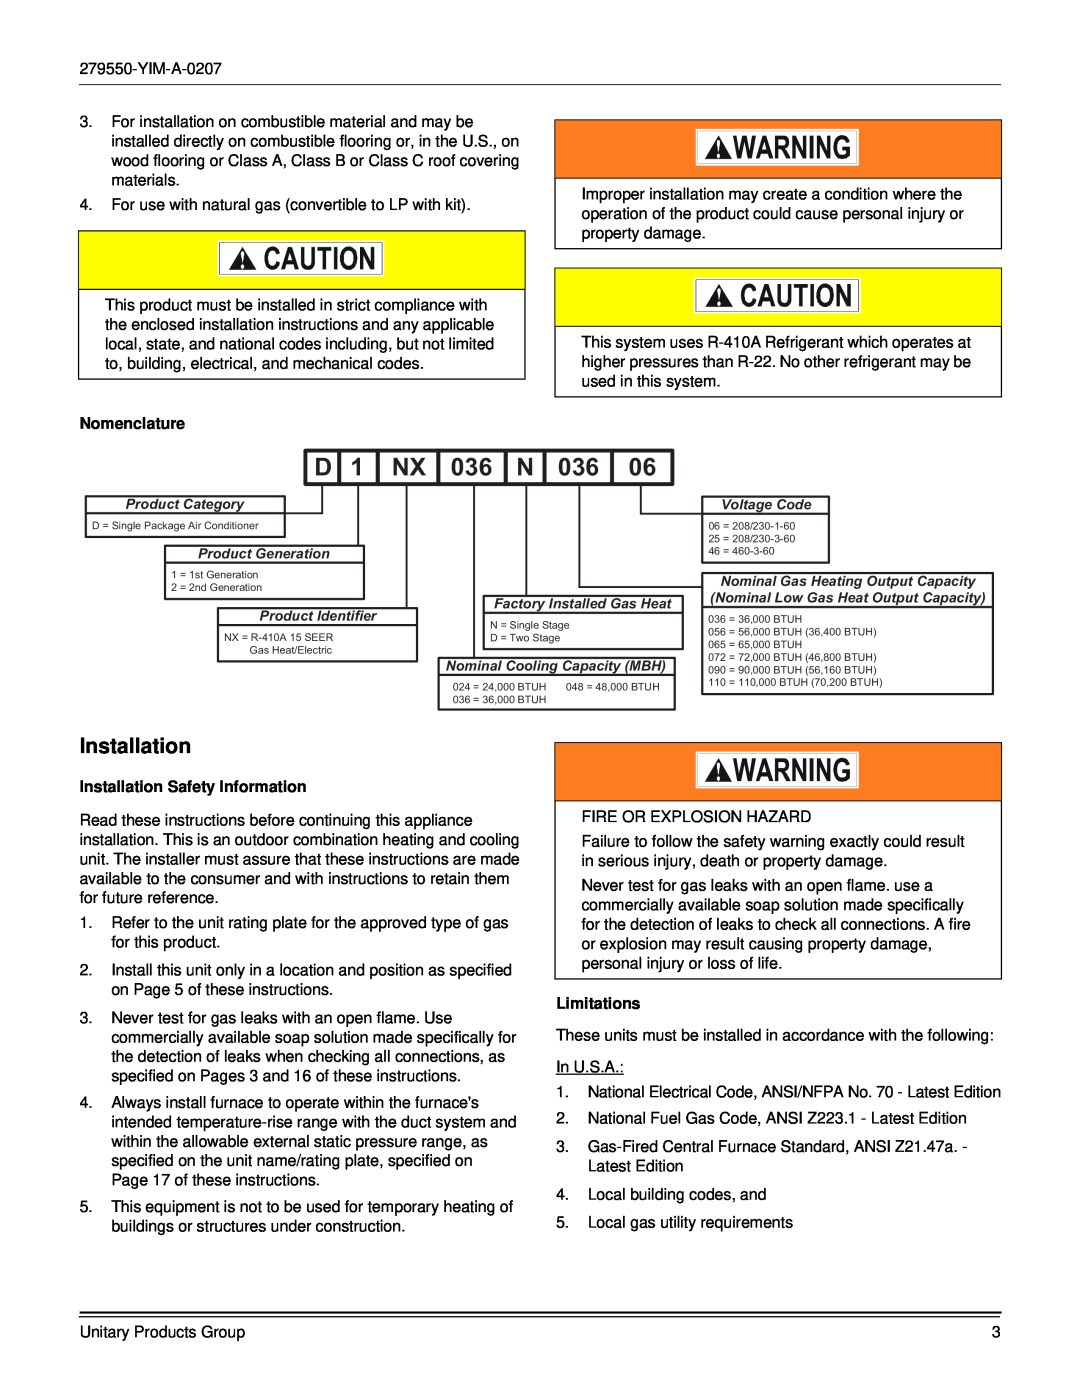 York R-410A dimensions Nomenclature, Installation Safety Information, Limitations, D 1 NX 036 N 